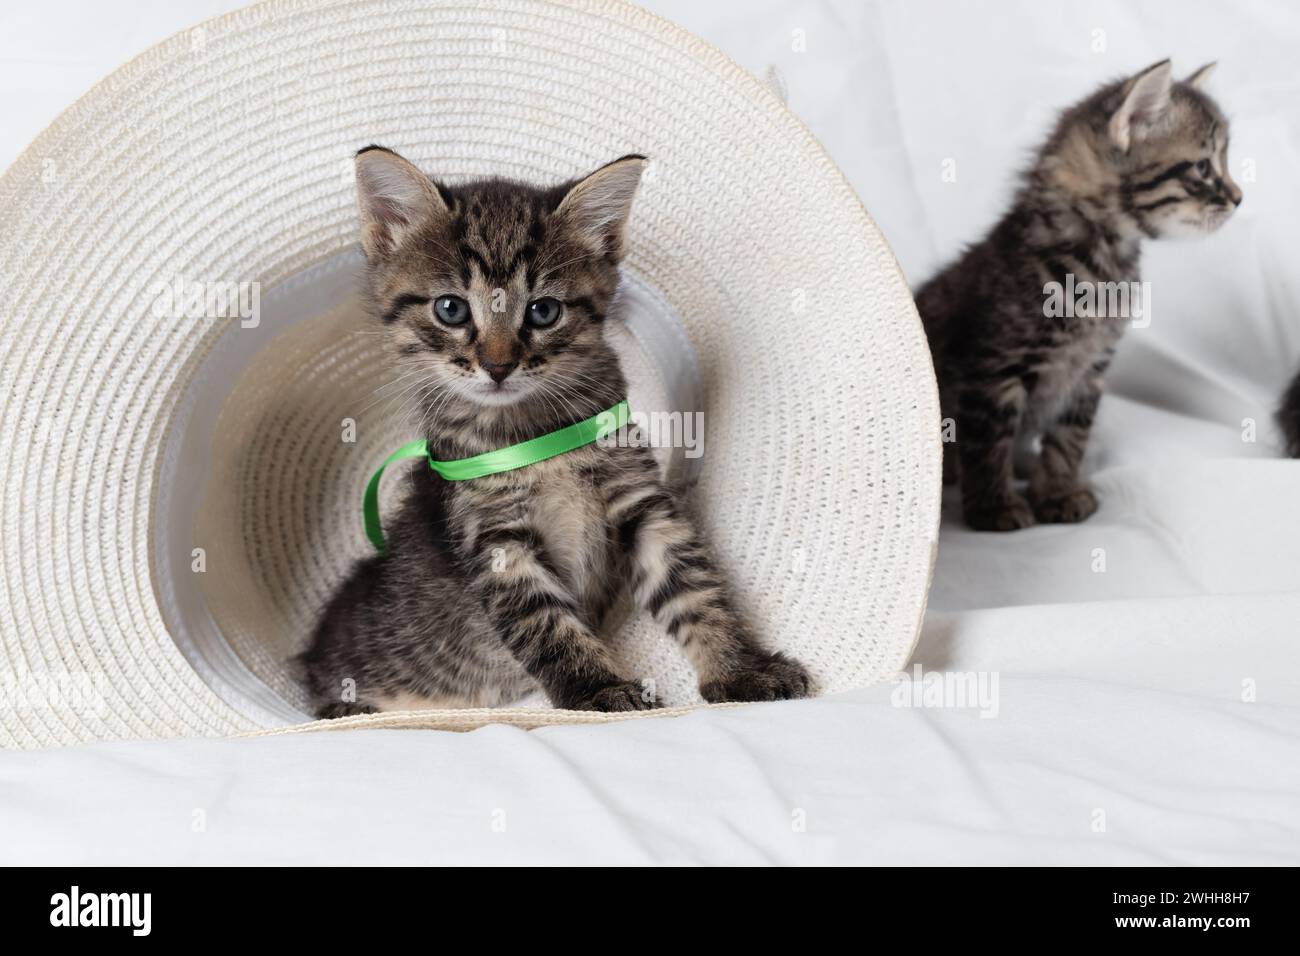 Tabby kitten sitting Banque D'Images